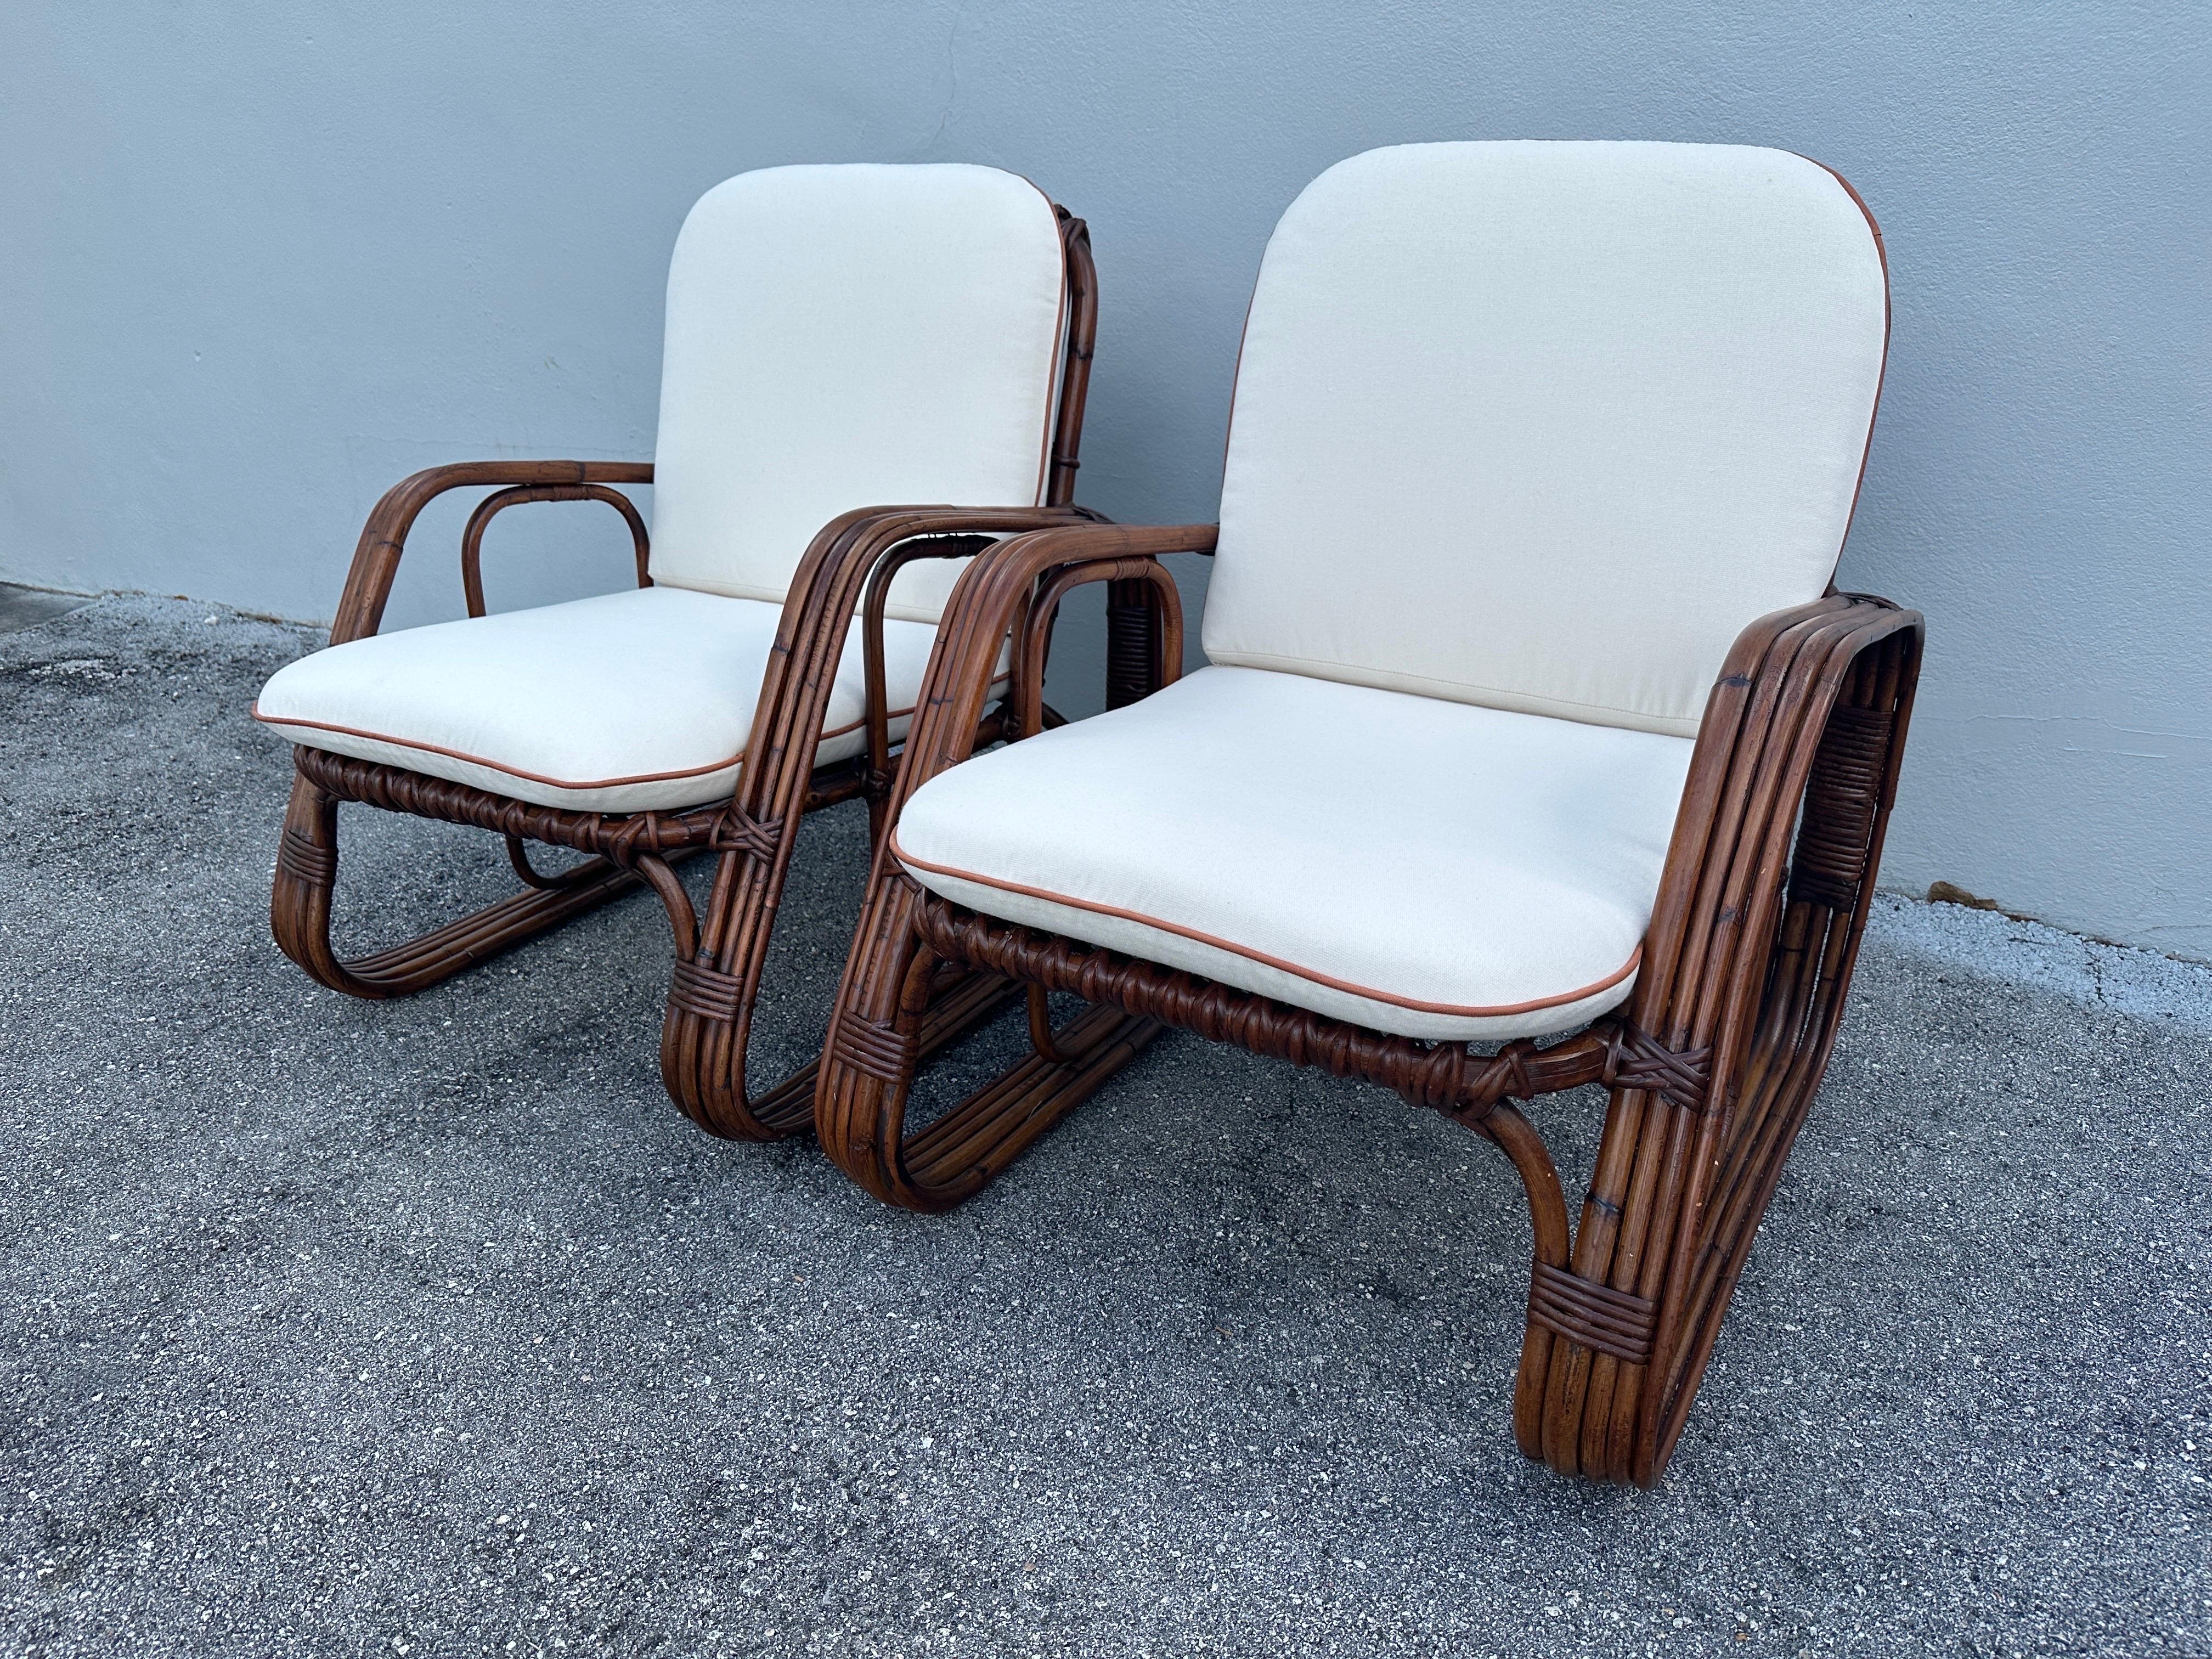 Pair of bent bamboo Lounge Chairs by famous Italian Brand Bonacina that is known for its amazing craftsmanship of bamboo furniture. The condition on this pair is superb and the chairs are ready to use. NEW custom cushions have been made to